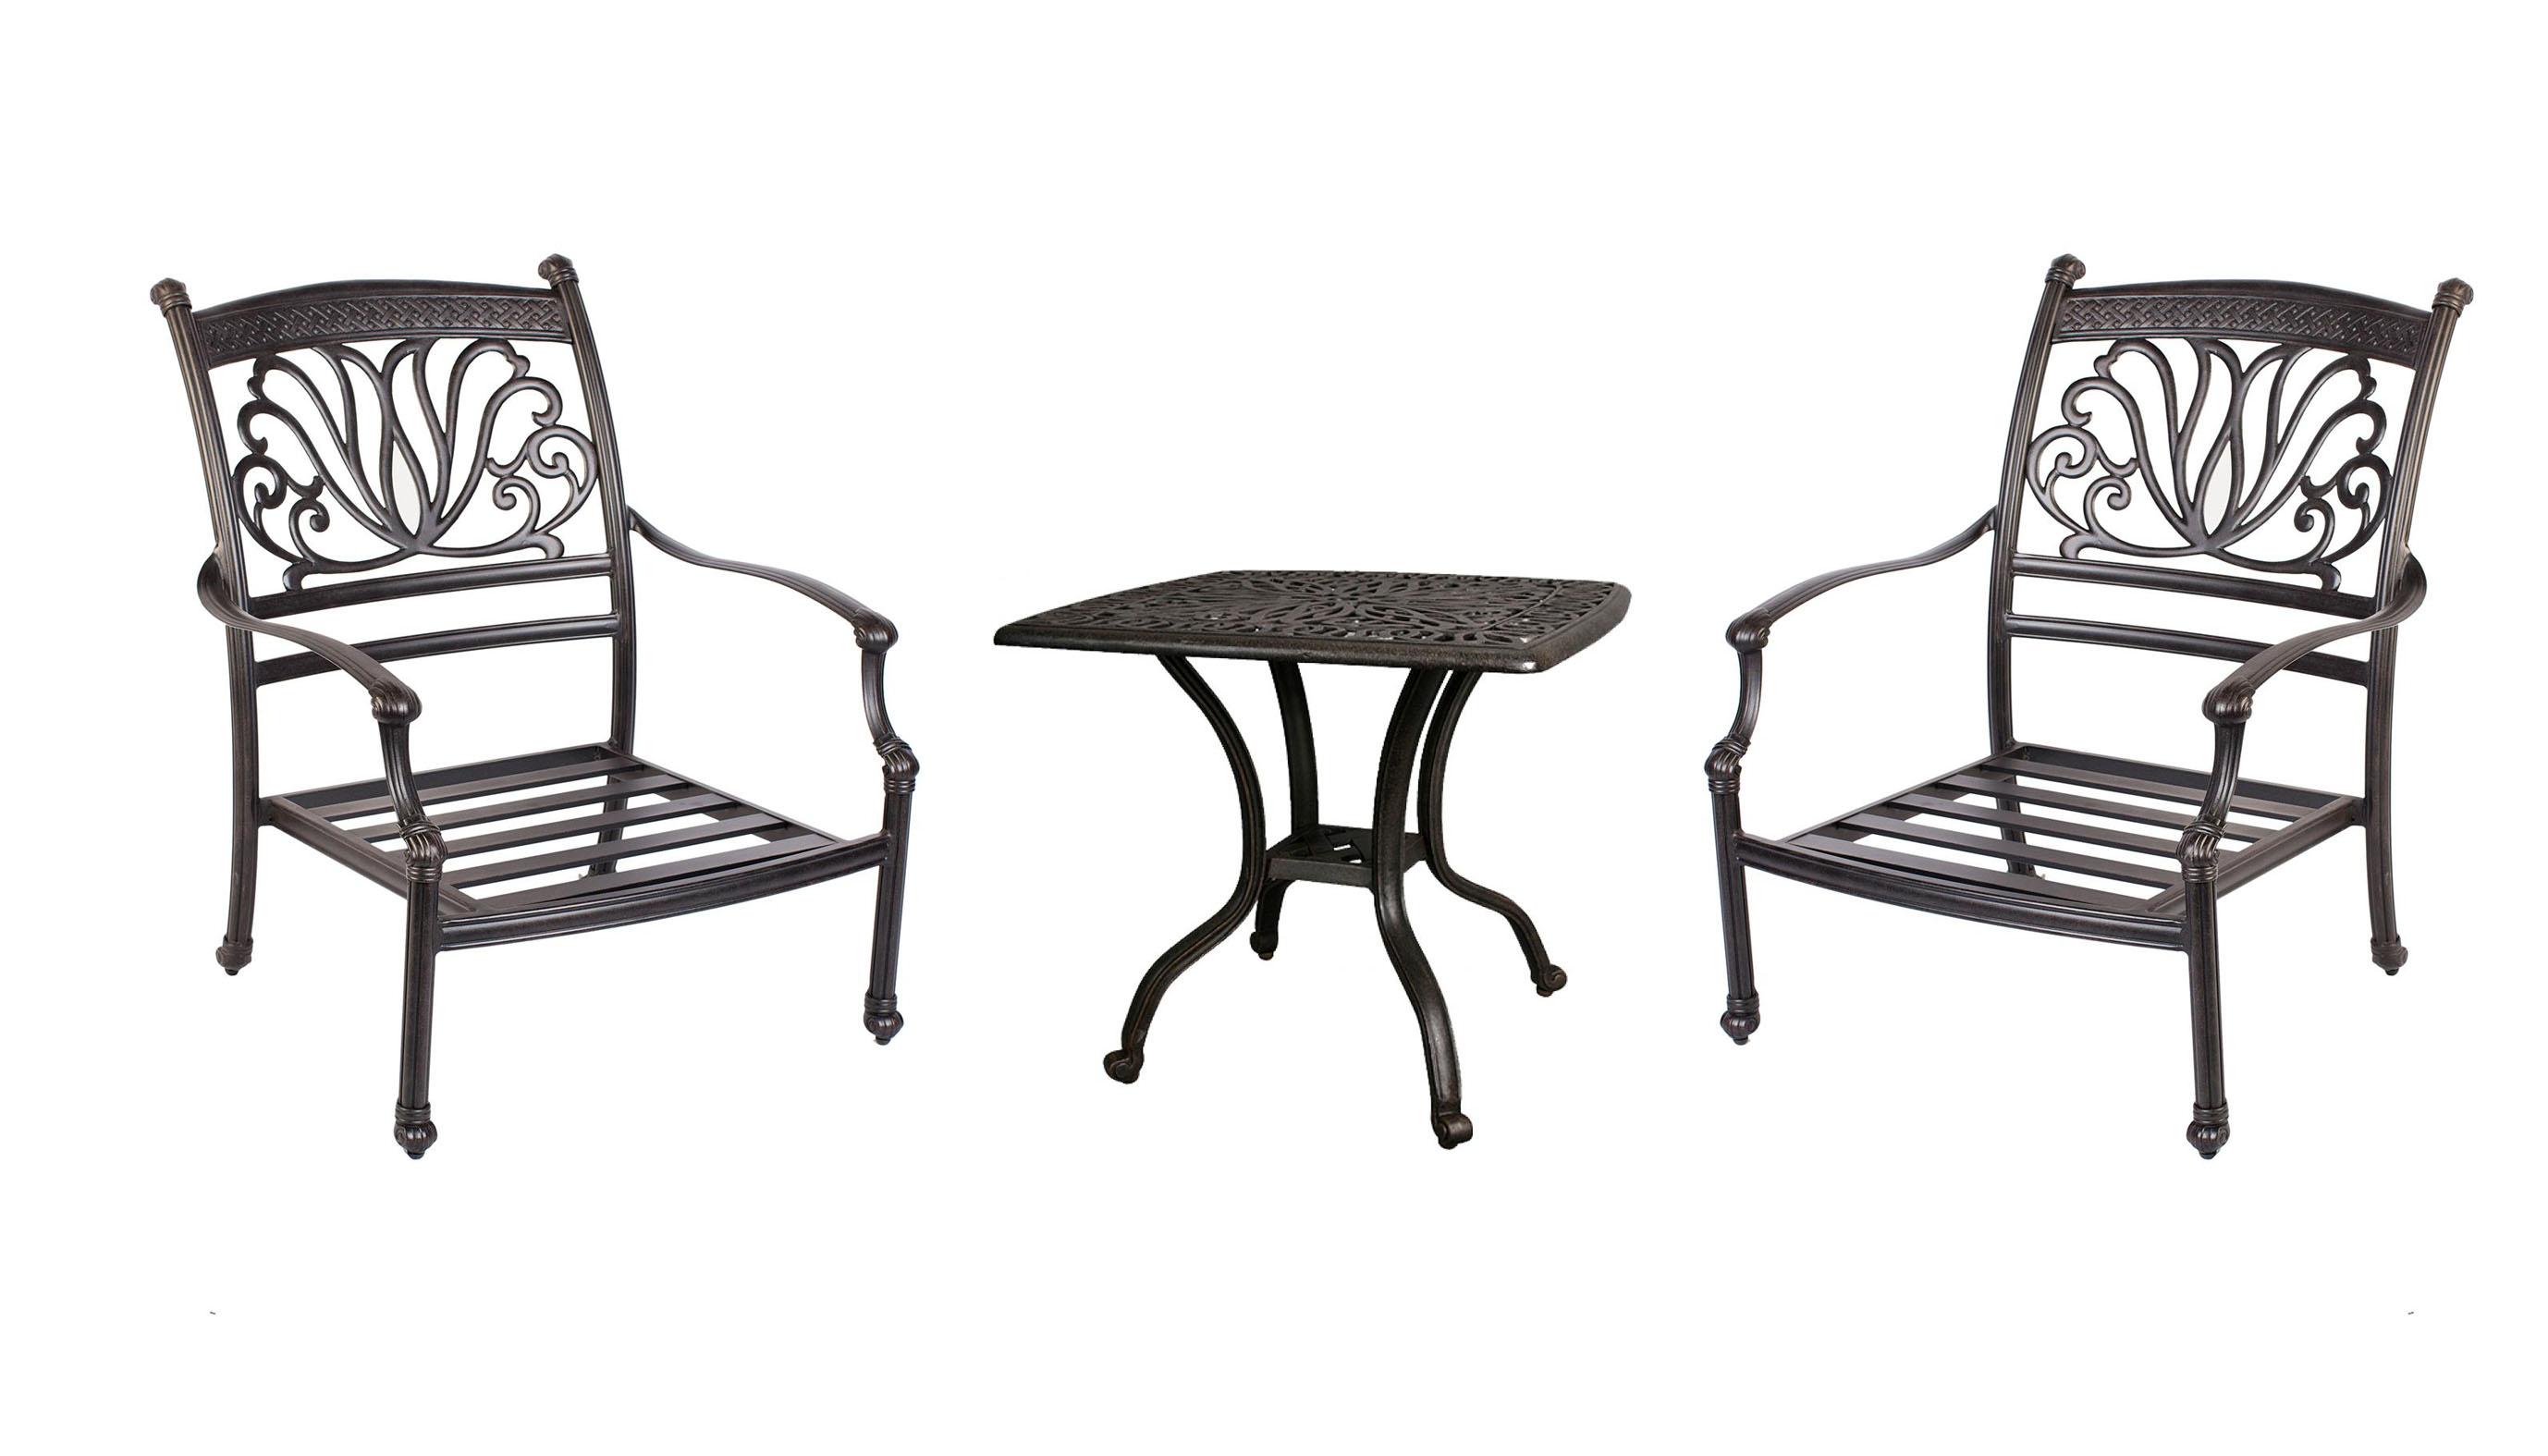 Contemporary Outdoor Conversation Set Ariana ARCCHB  SQAT21-Set-3 in Bronze, Natural Fabric